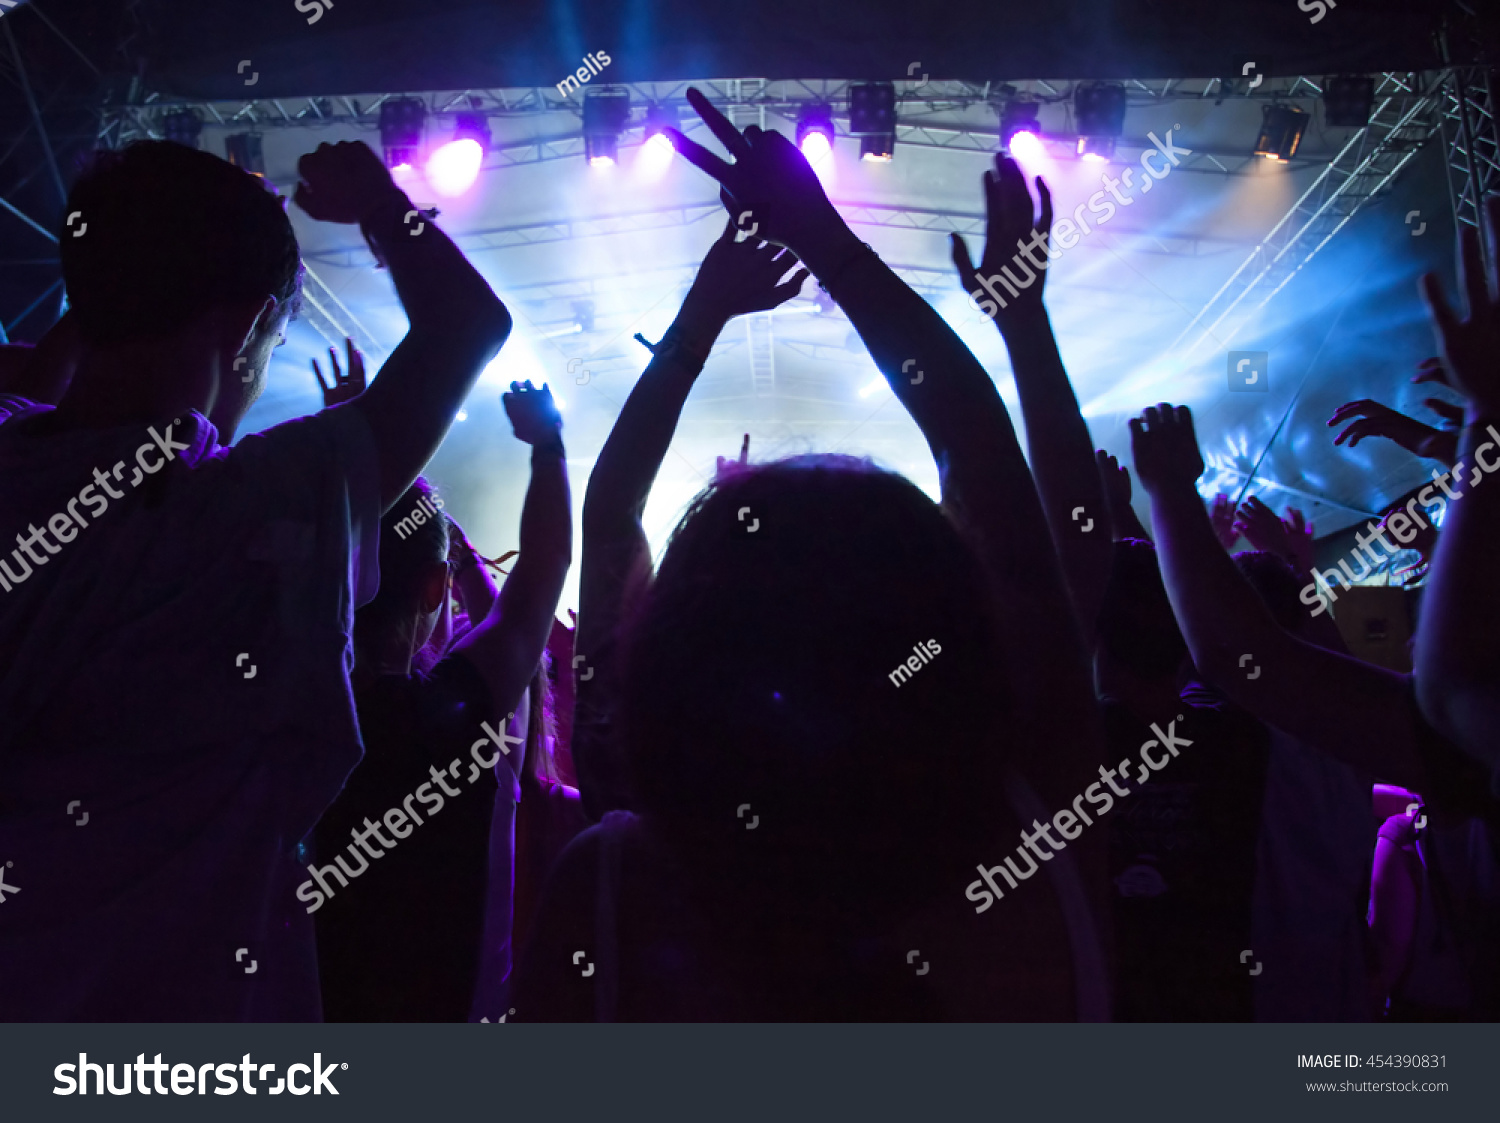 Crowd Concert Cheering Crowd Front Bright Stock Photo (Edit Now) 454390831